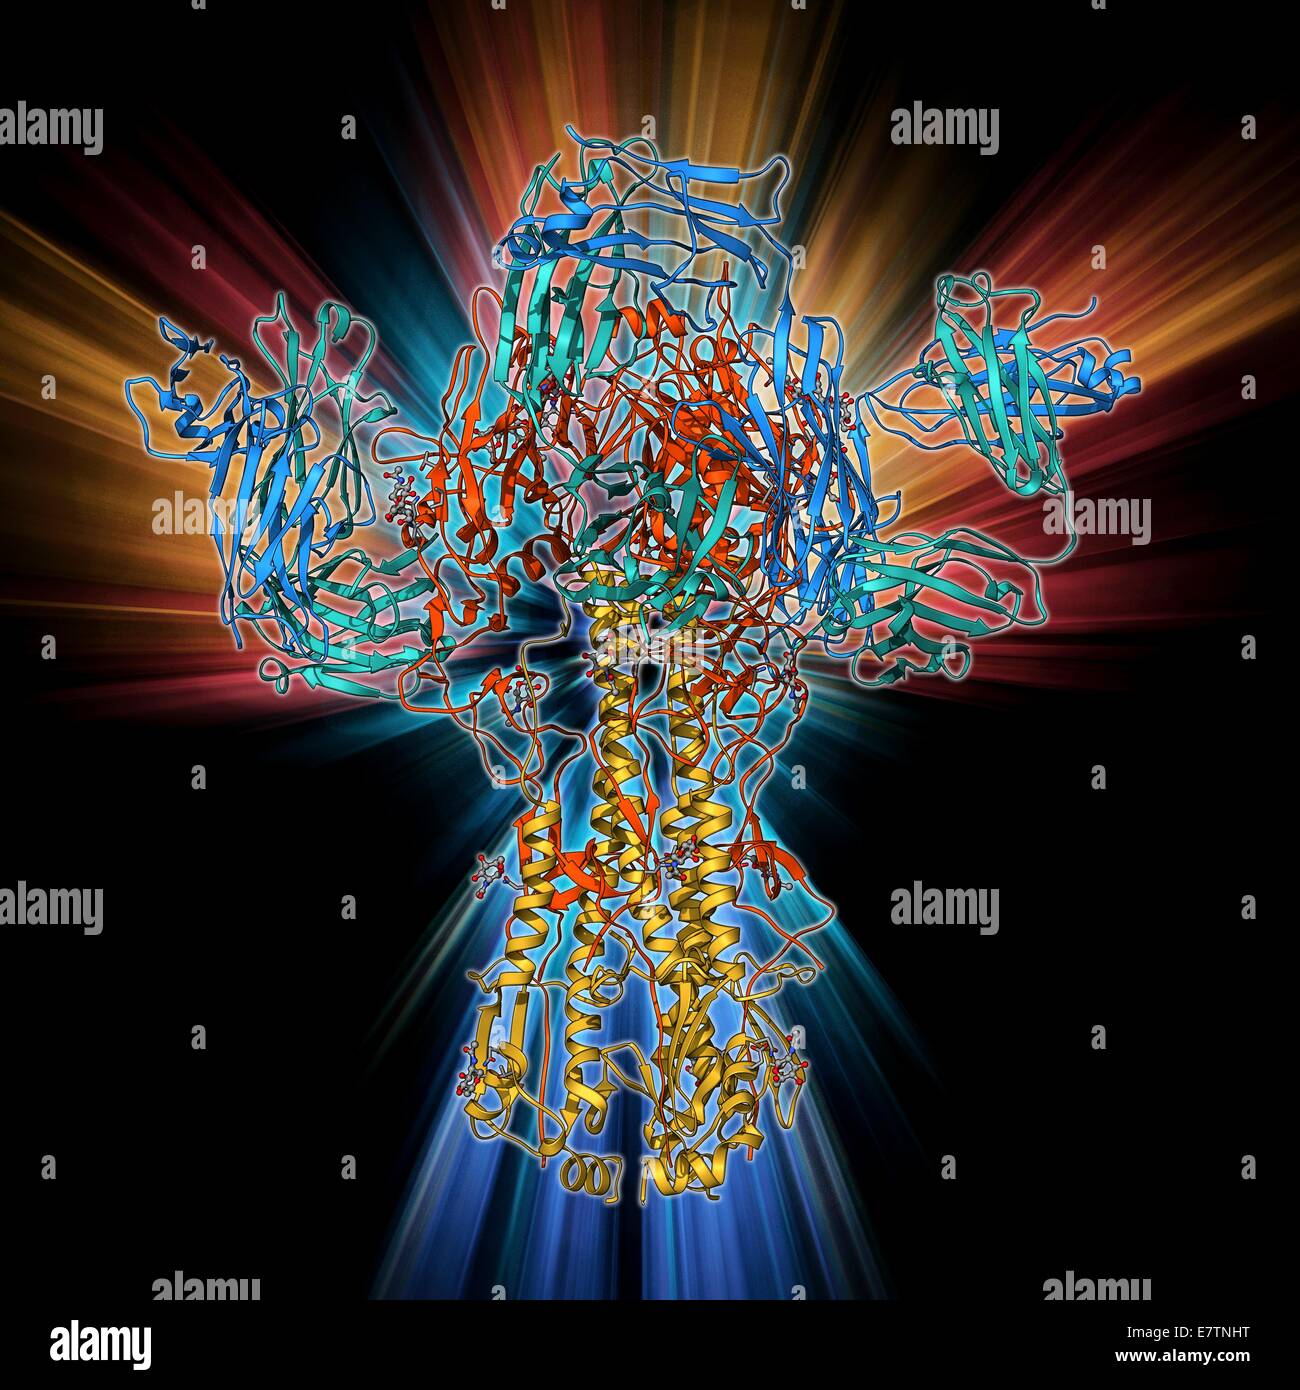 Haemagglutinin viral surface protein. Molecular model of haemagglutinin, a surface protein from the influenza virus, complexed with a neutralising antibody. Haemagglutinin's function is to bind to the surface of its target cell and allow the viral genes i Stock Photo